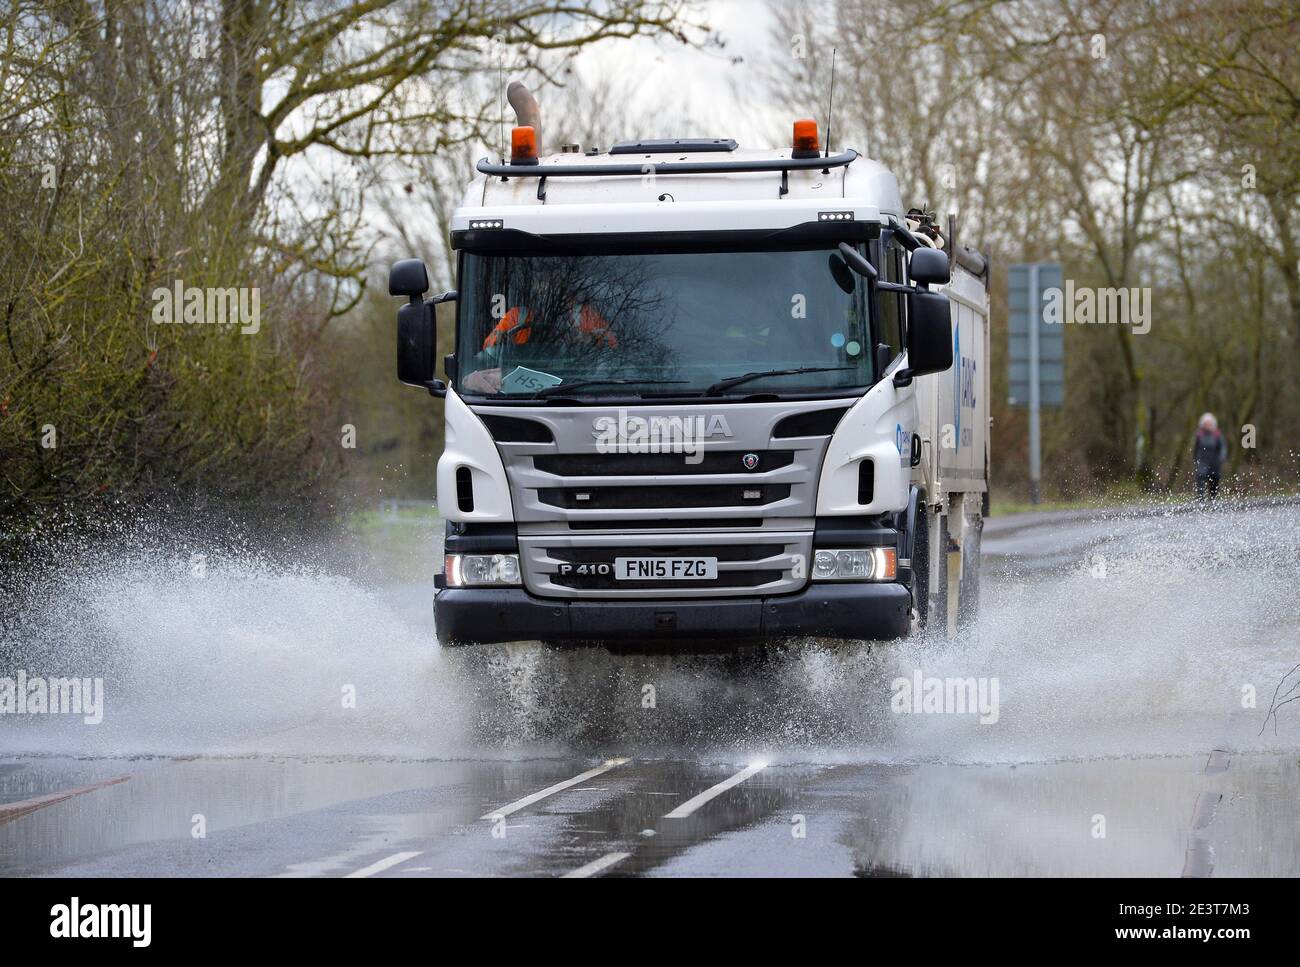 Leicester, Leicestershire, UK 19th Jan 2021. UK. Weather. Flooding. Cars drive through flood water caused by Storm Christoph on Mountsorrel Lane in Leicestershire. Alex Hannam/Alamy Live News Stock Photo